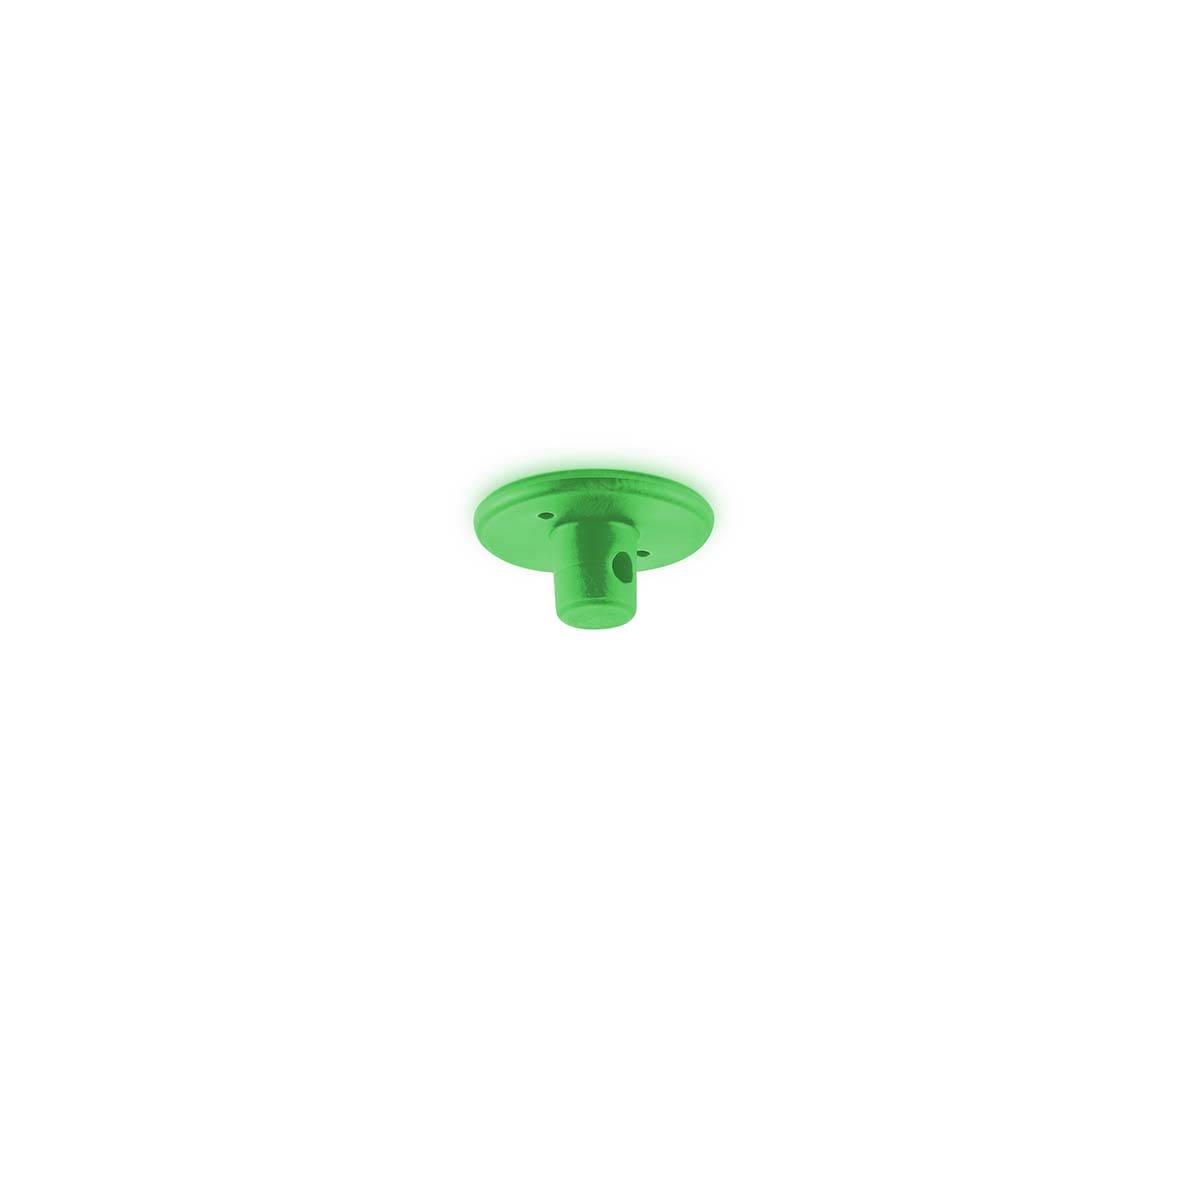 Tangla lighting - TLHG003GN - Silicone cable hanger - mix and match - green